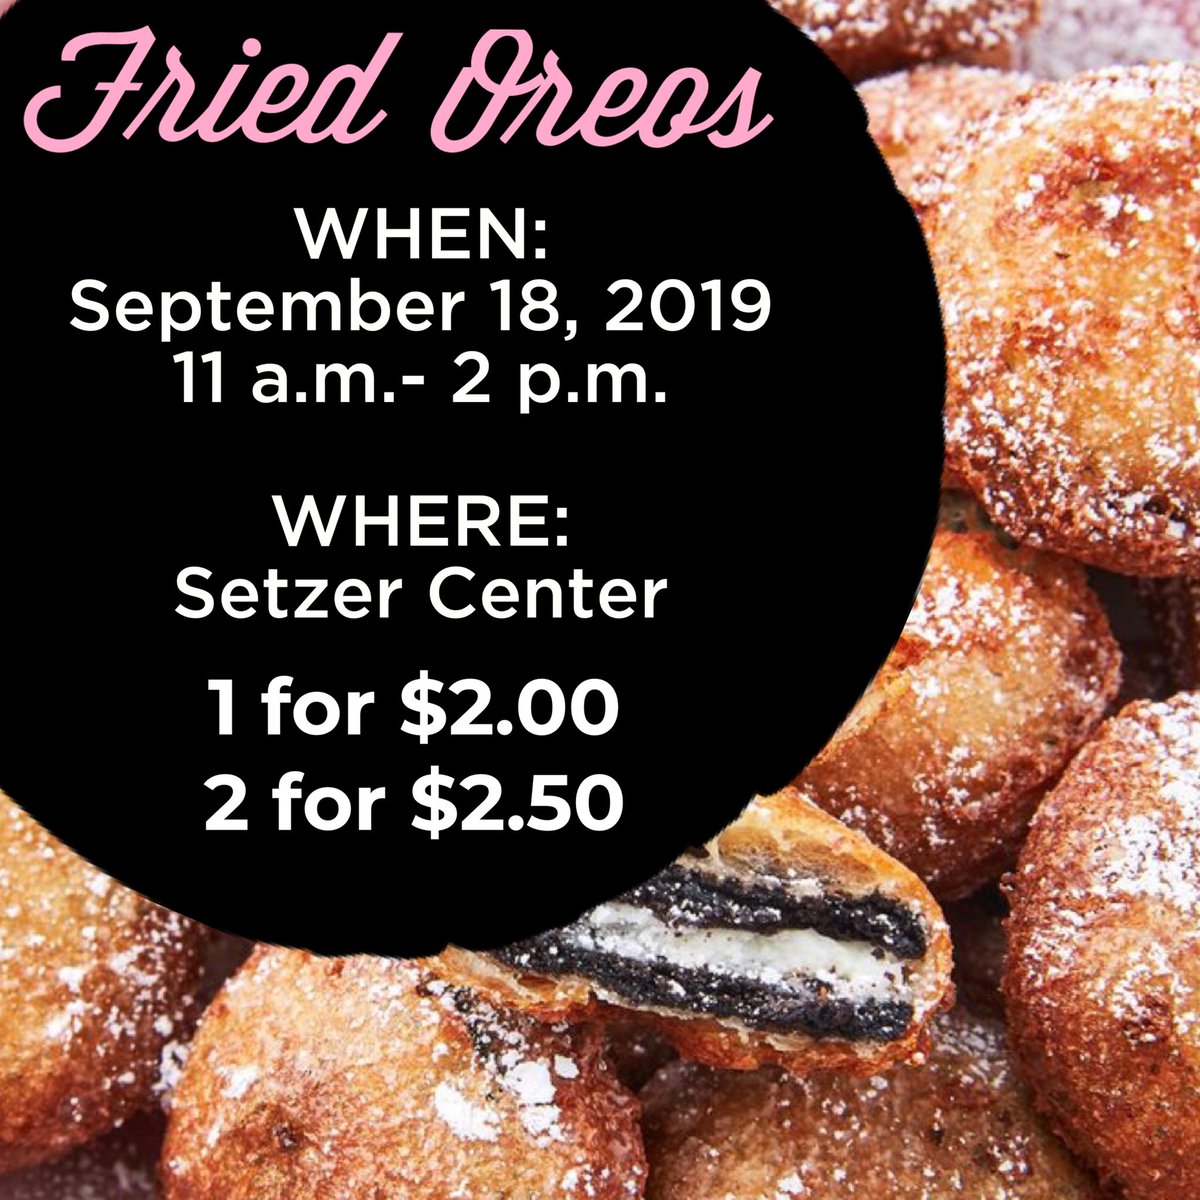 YOLO (YOU. OBVIOUSLY. LOVE. OREOS.), so come out on Wednesday from 11 am - 2 pm and buy them fried from yours truly!😋 #WomanToWoman
#FriedOreos #WomanWednesday